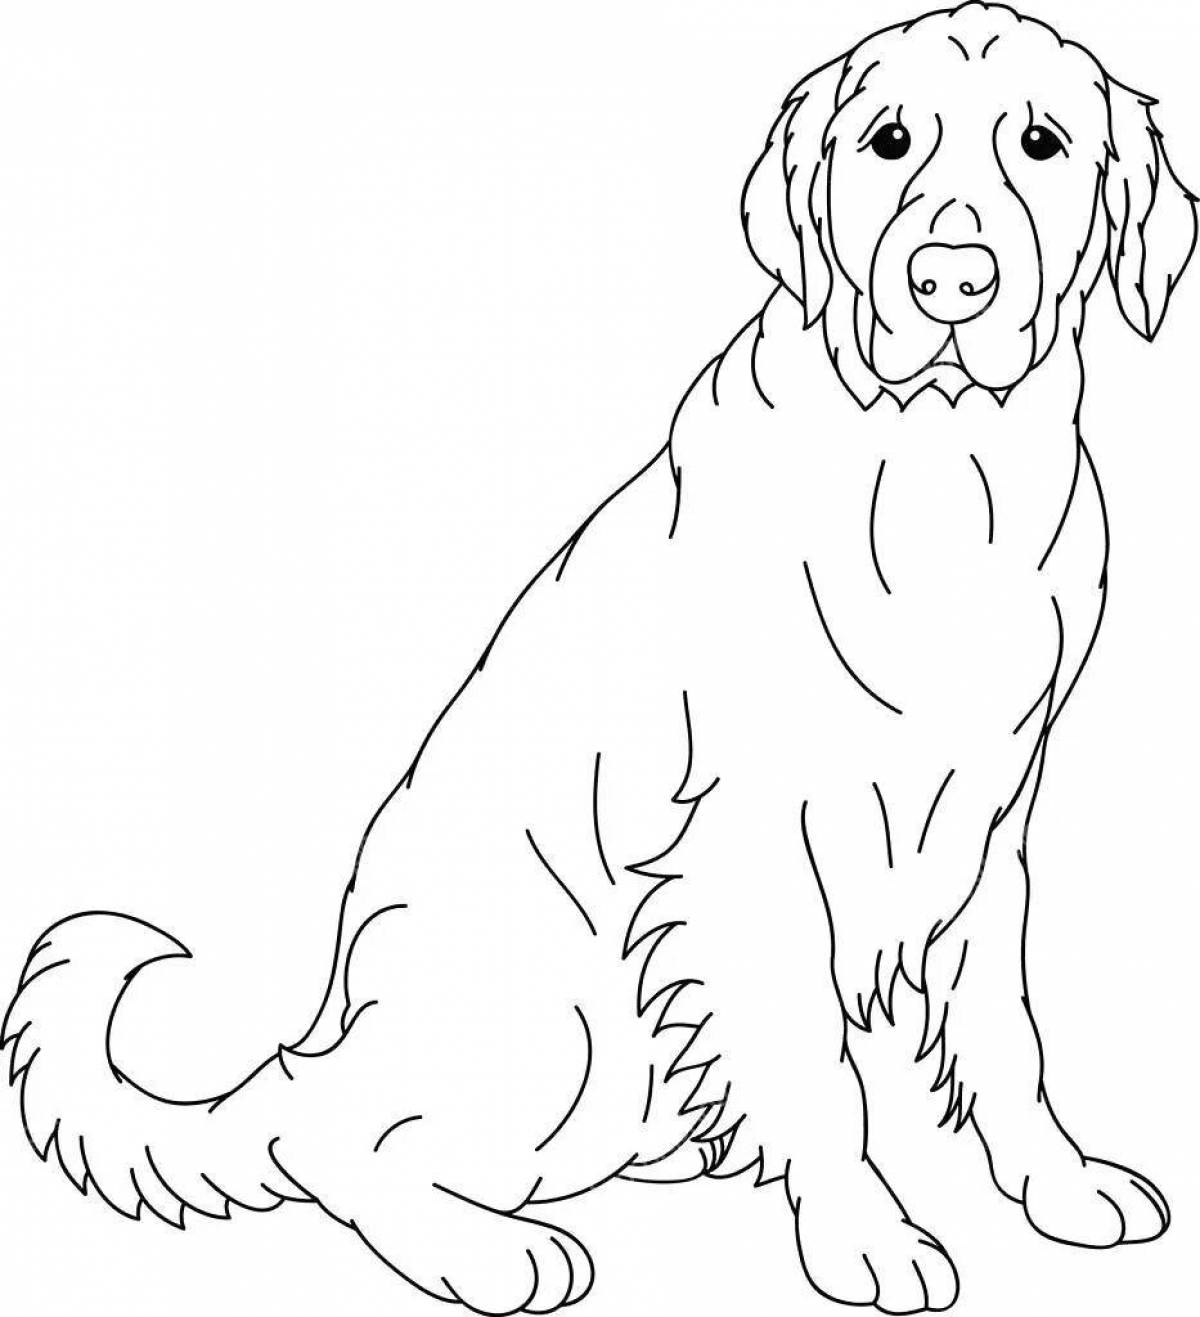 Snuggly golden retriever coloring page